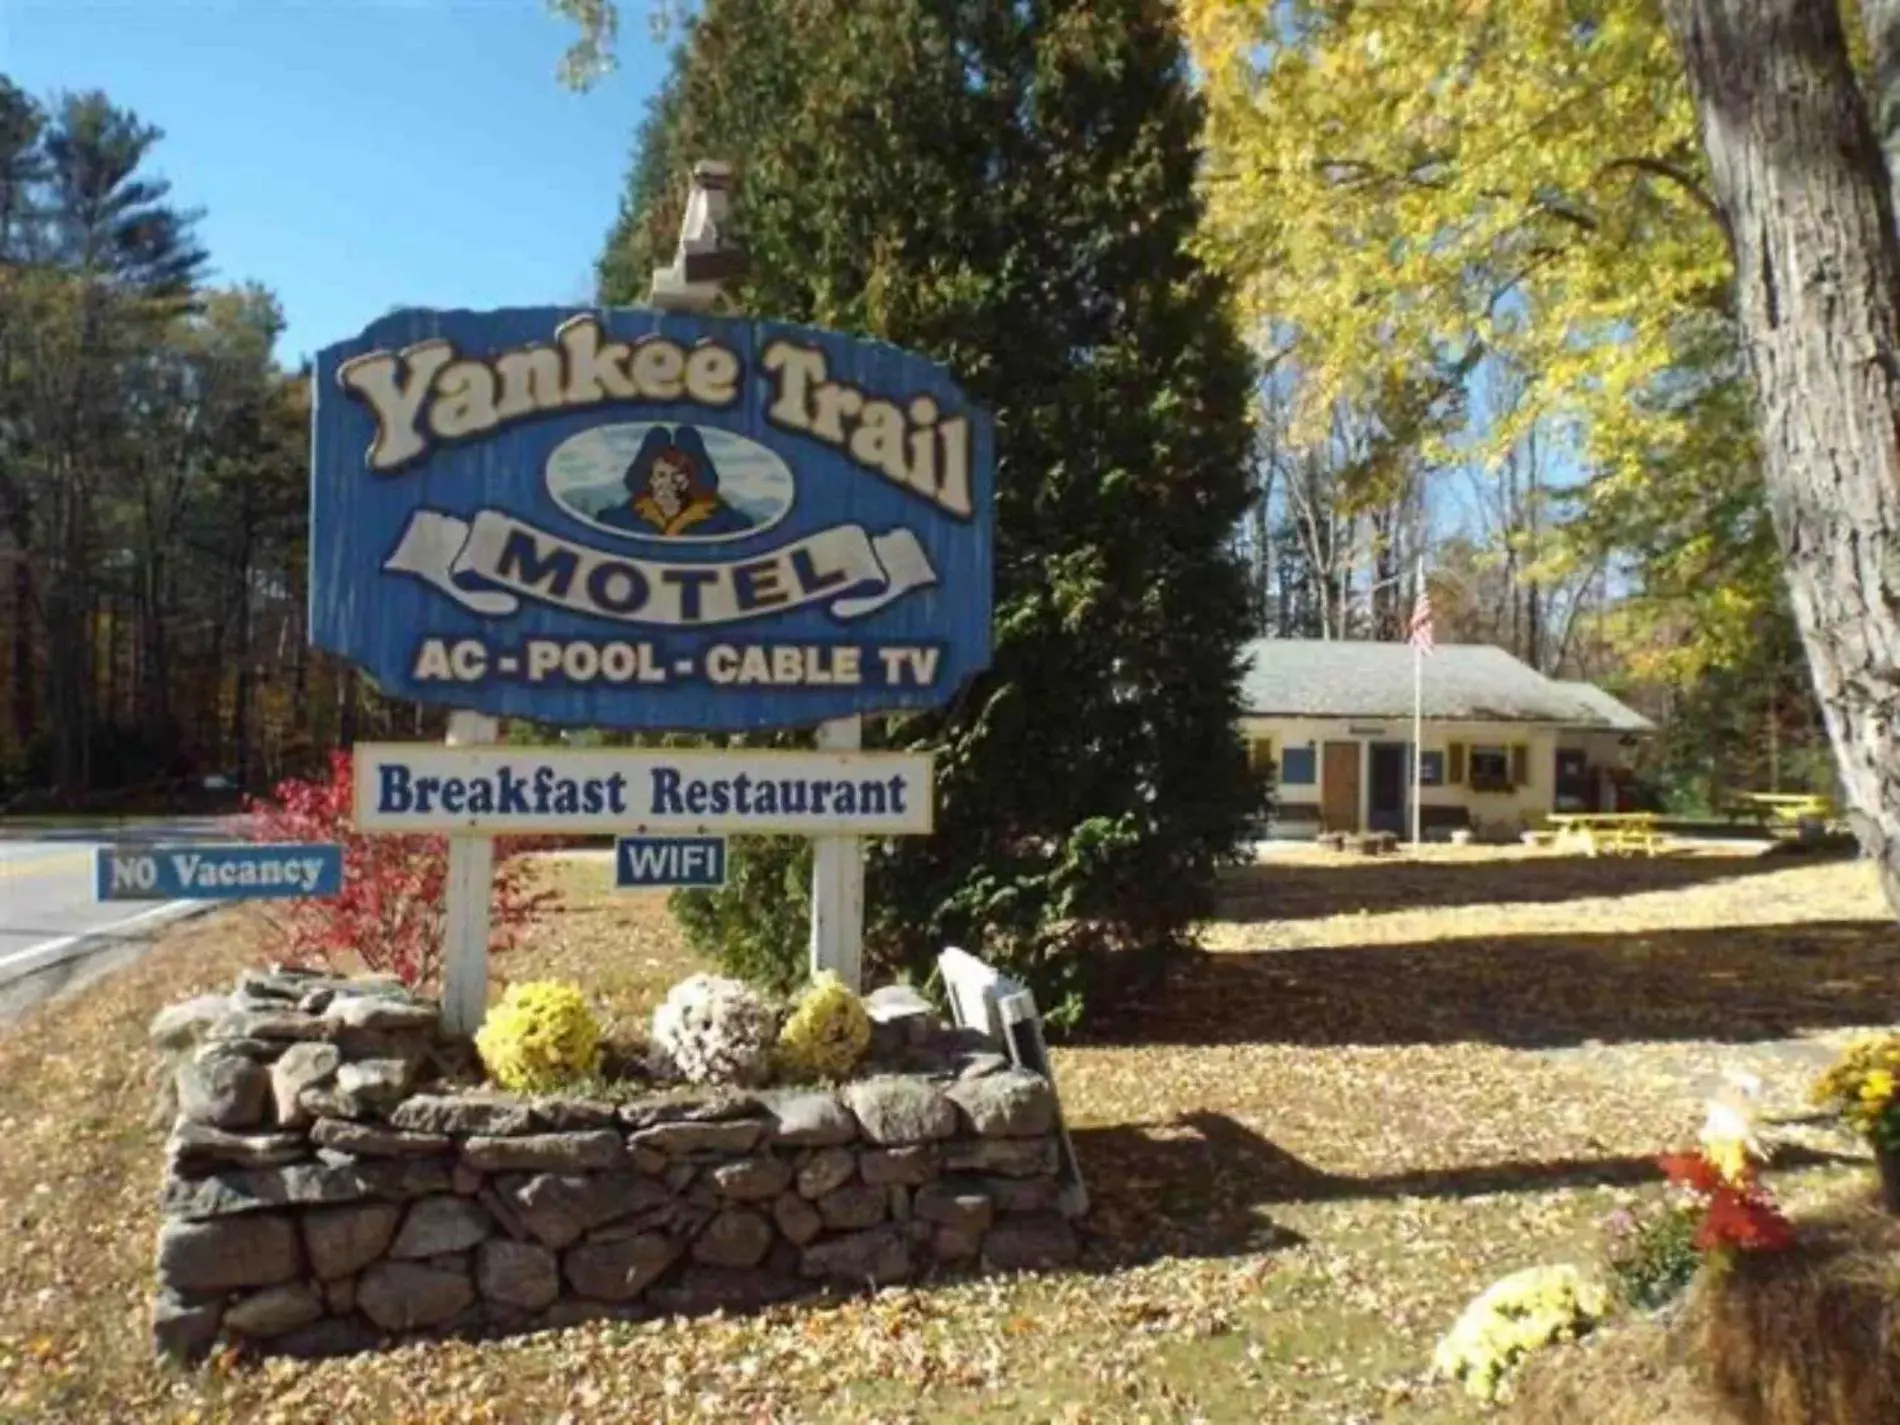 Property building in Yankee Trail Motel